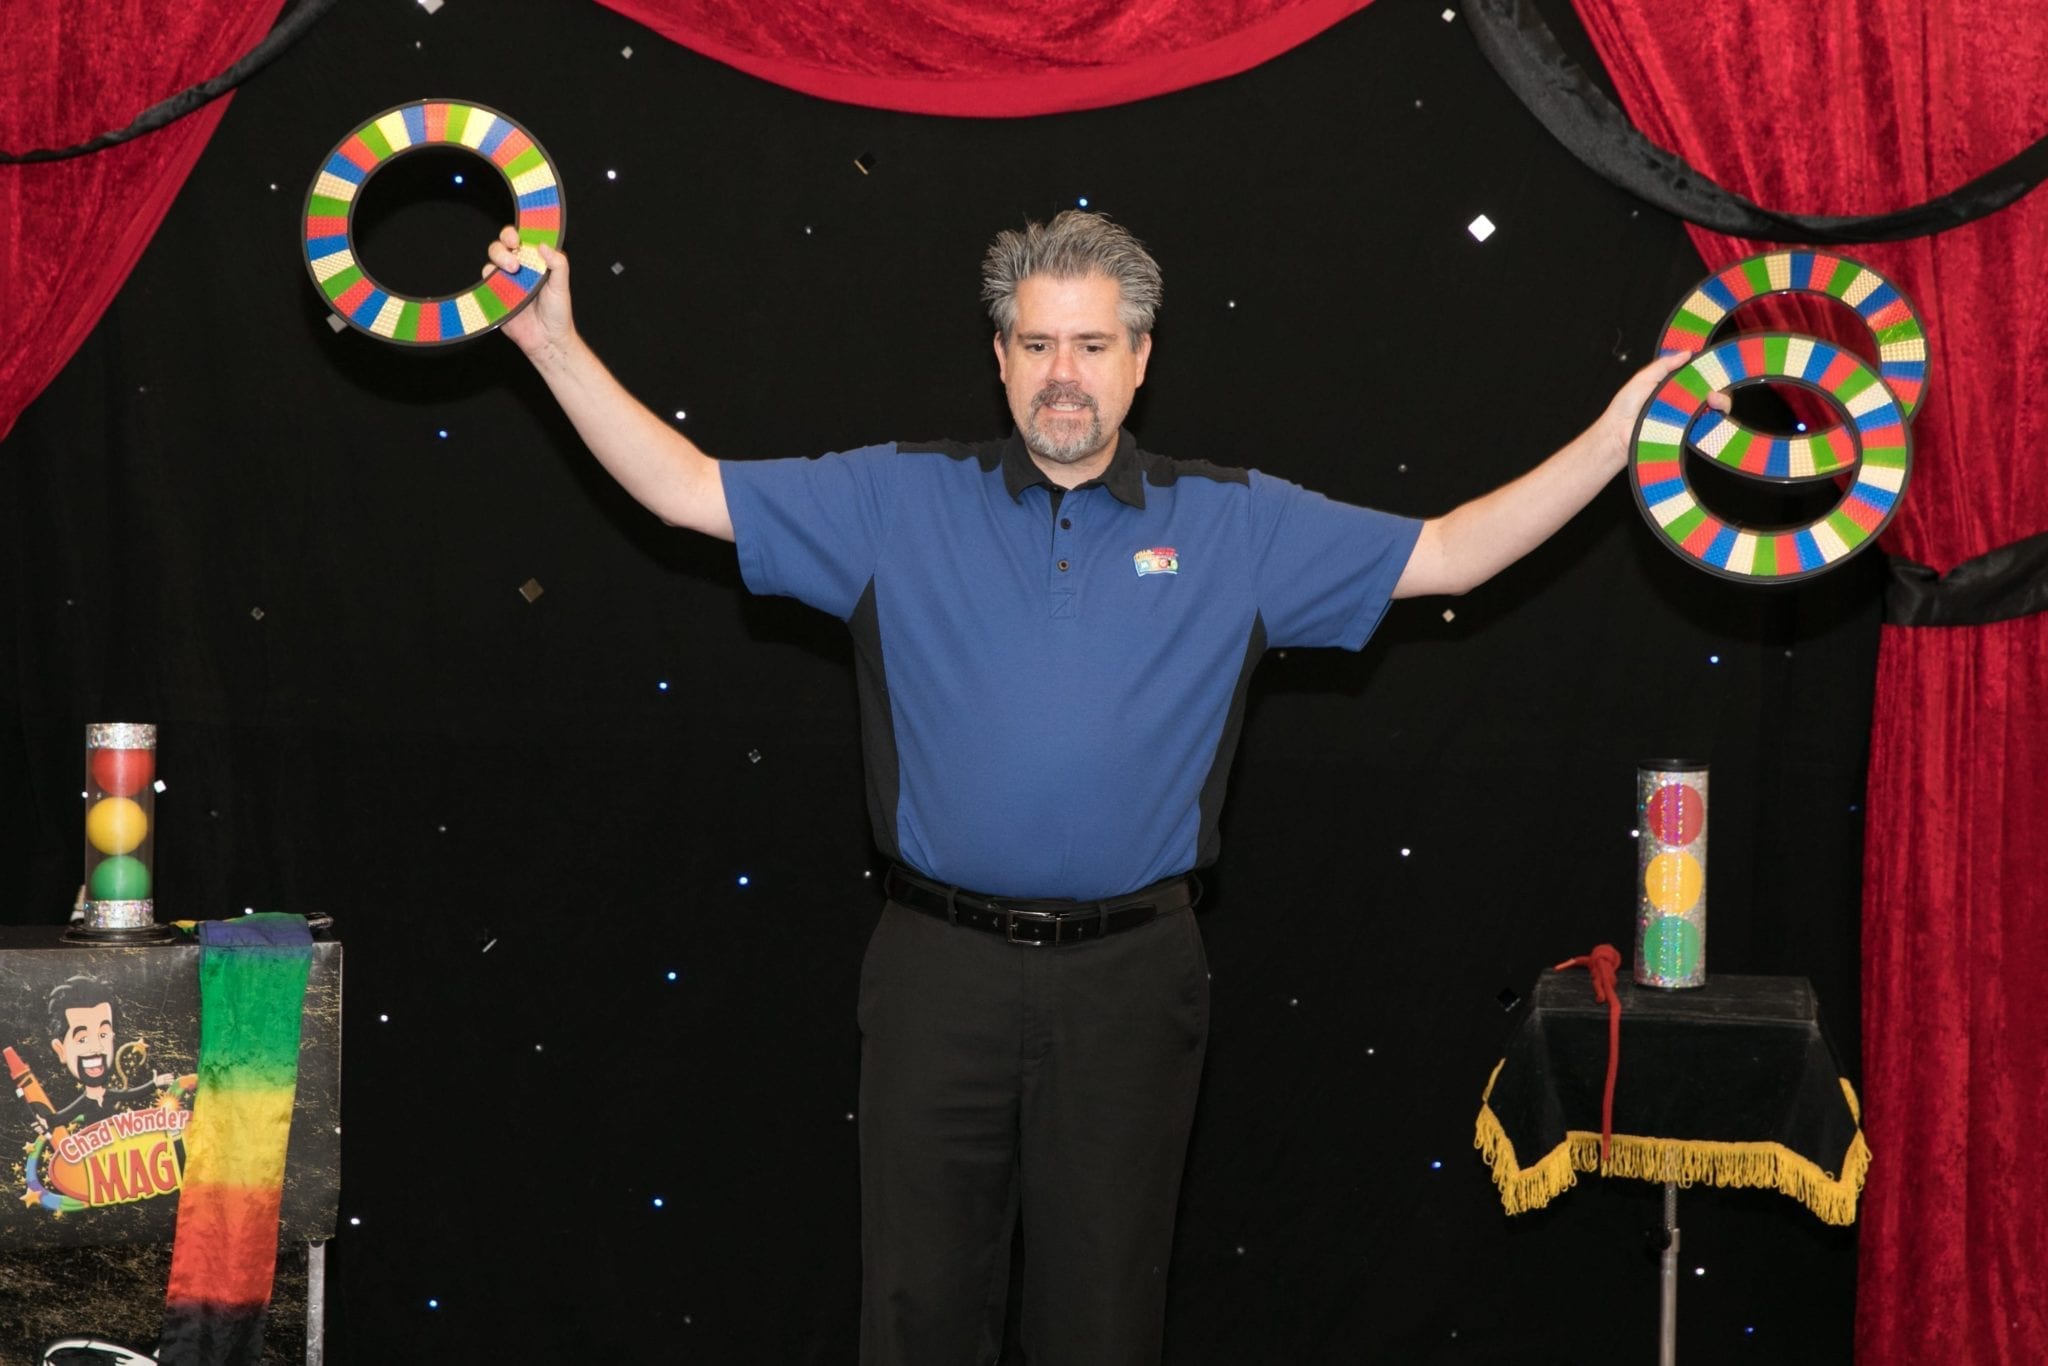 Magic show with magic rings 